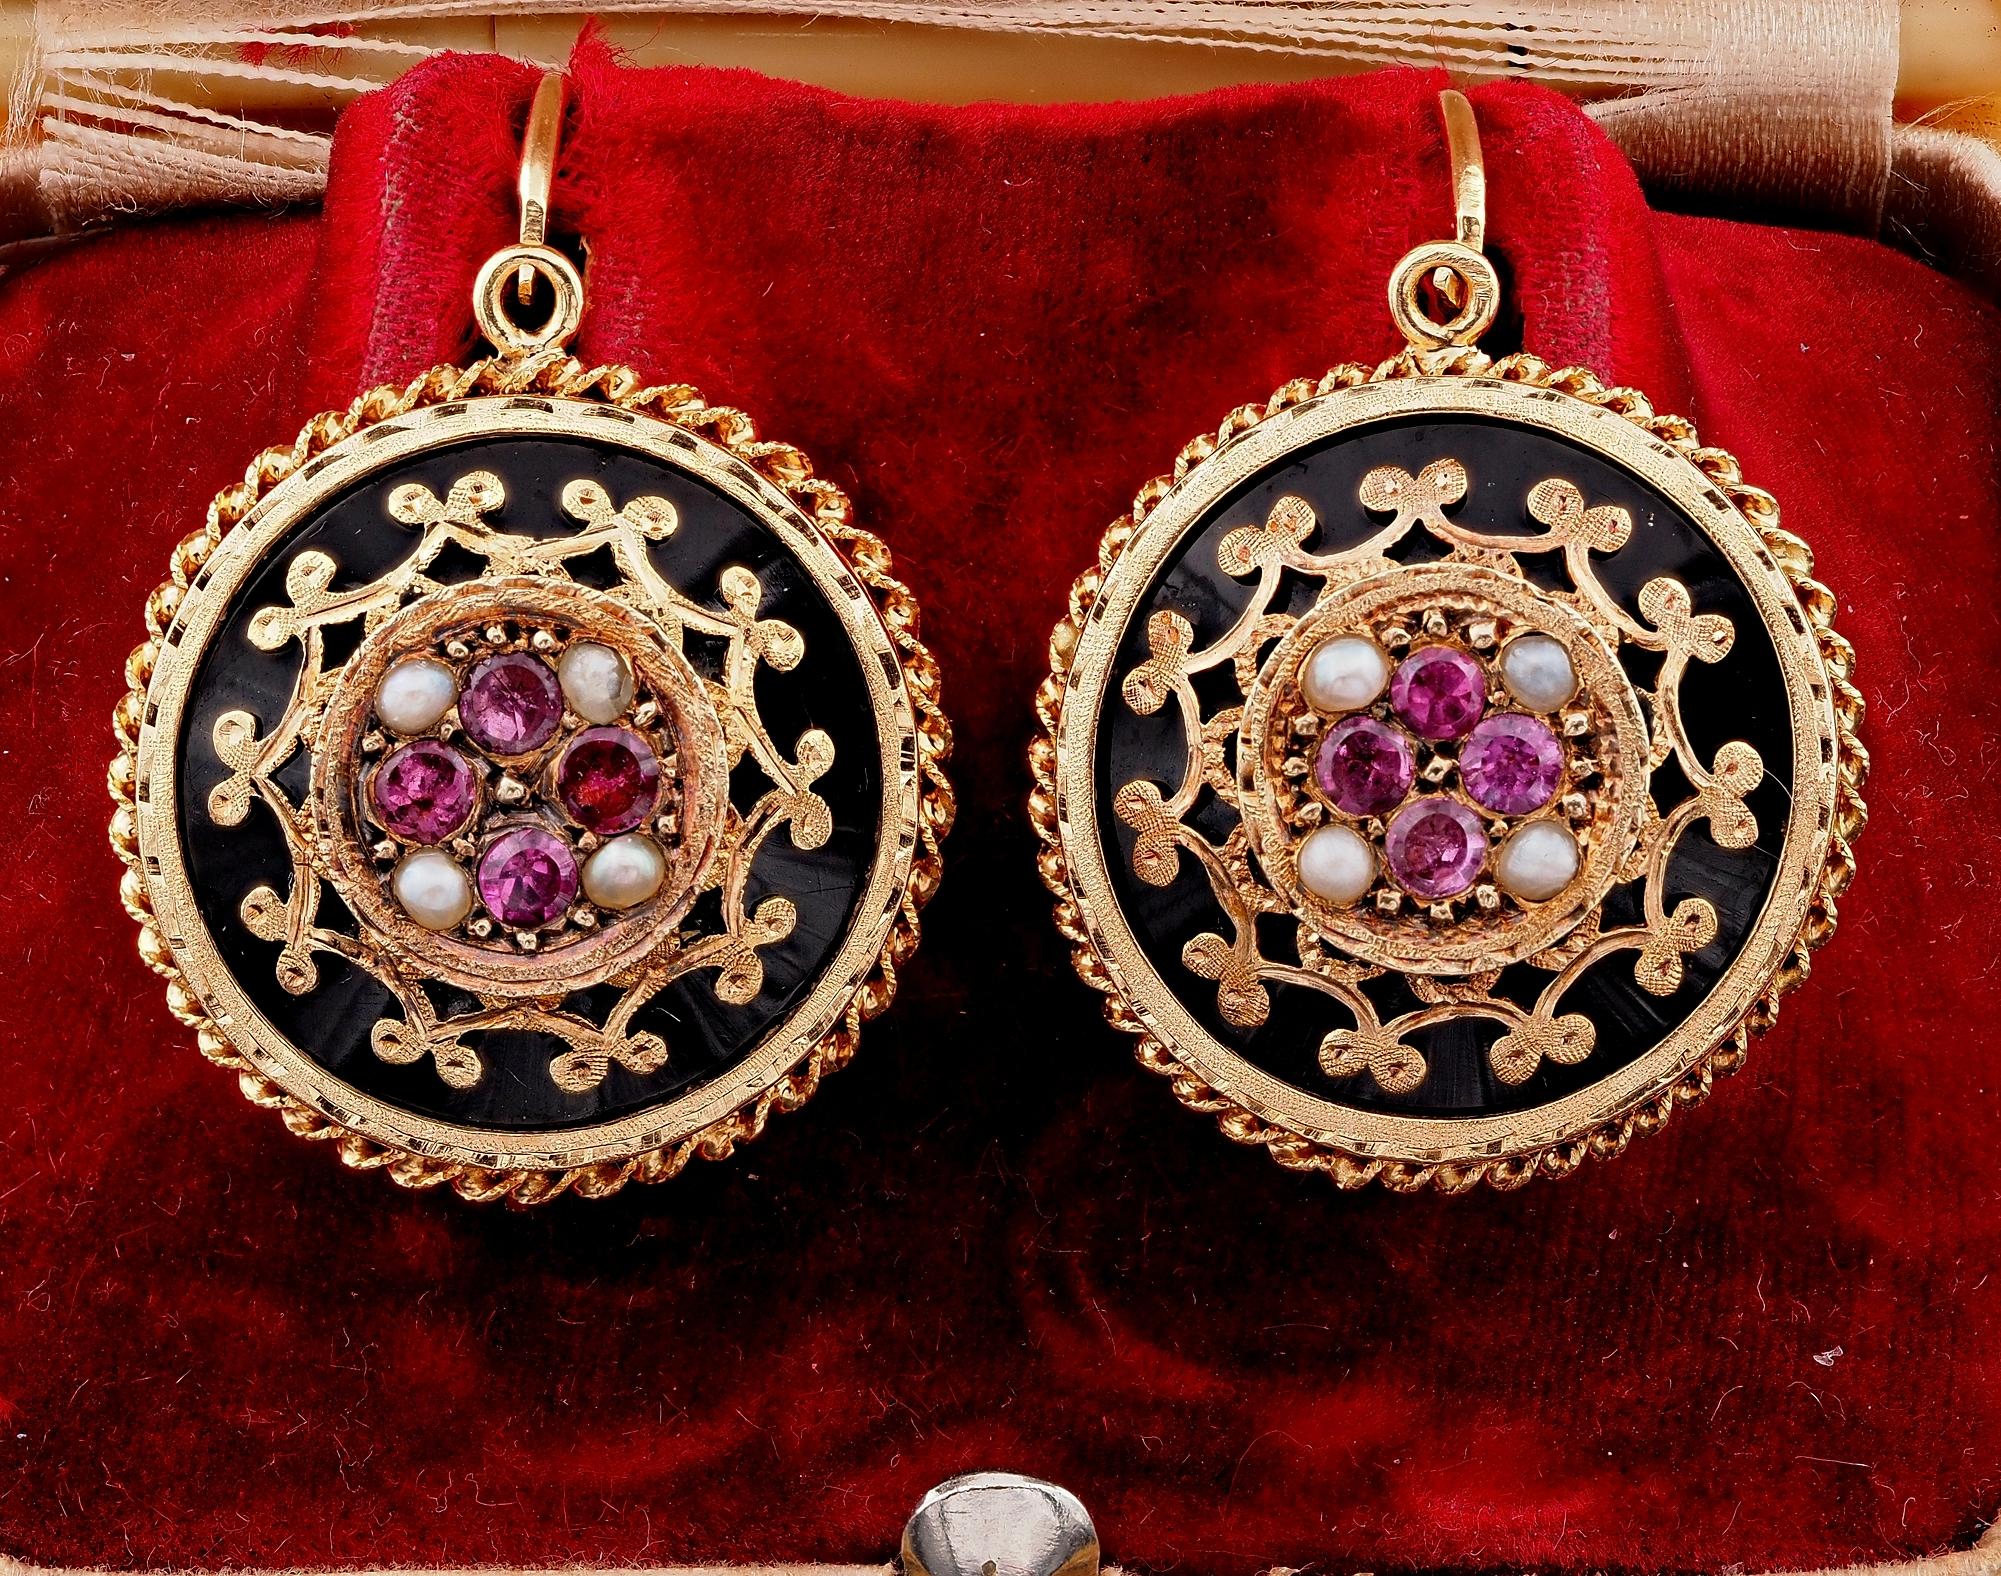 These beautiful Victorian era earrings are French origin, 1880 ca
Bearing French hallmarks for the period
Exquisitely hand crafted by the past Victorian masters of solid 18 KT gold
Quite unique Etruscan Revival round shaped tops, displaying a